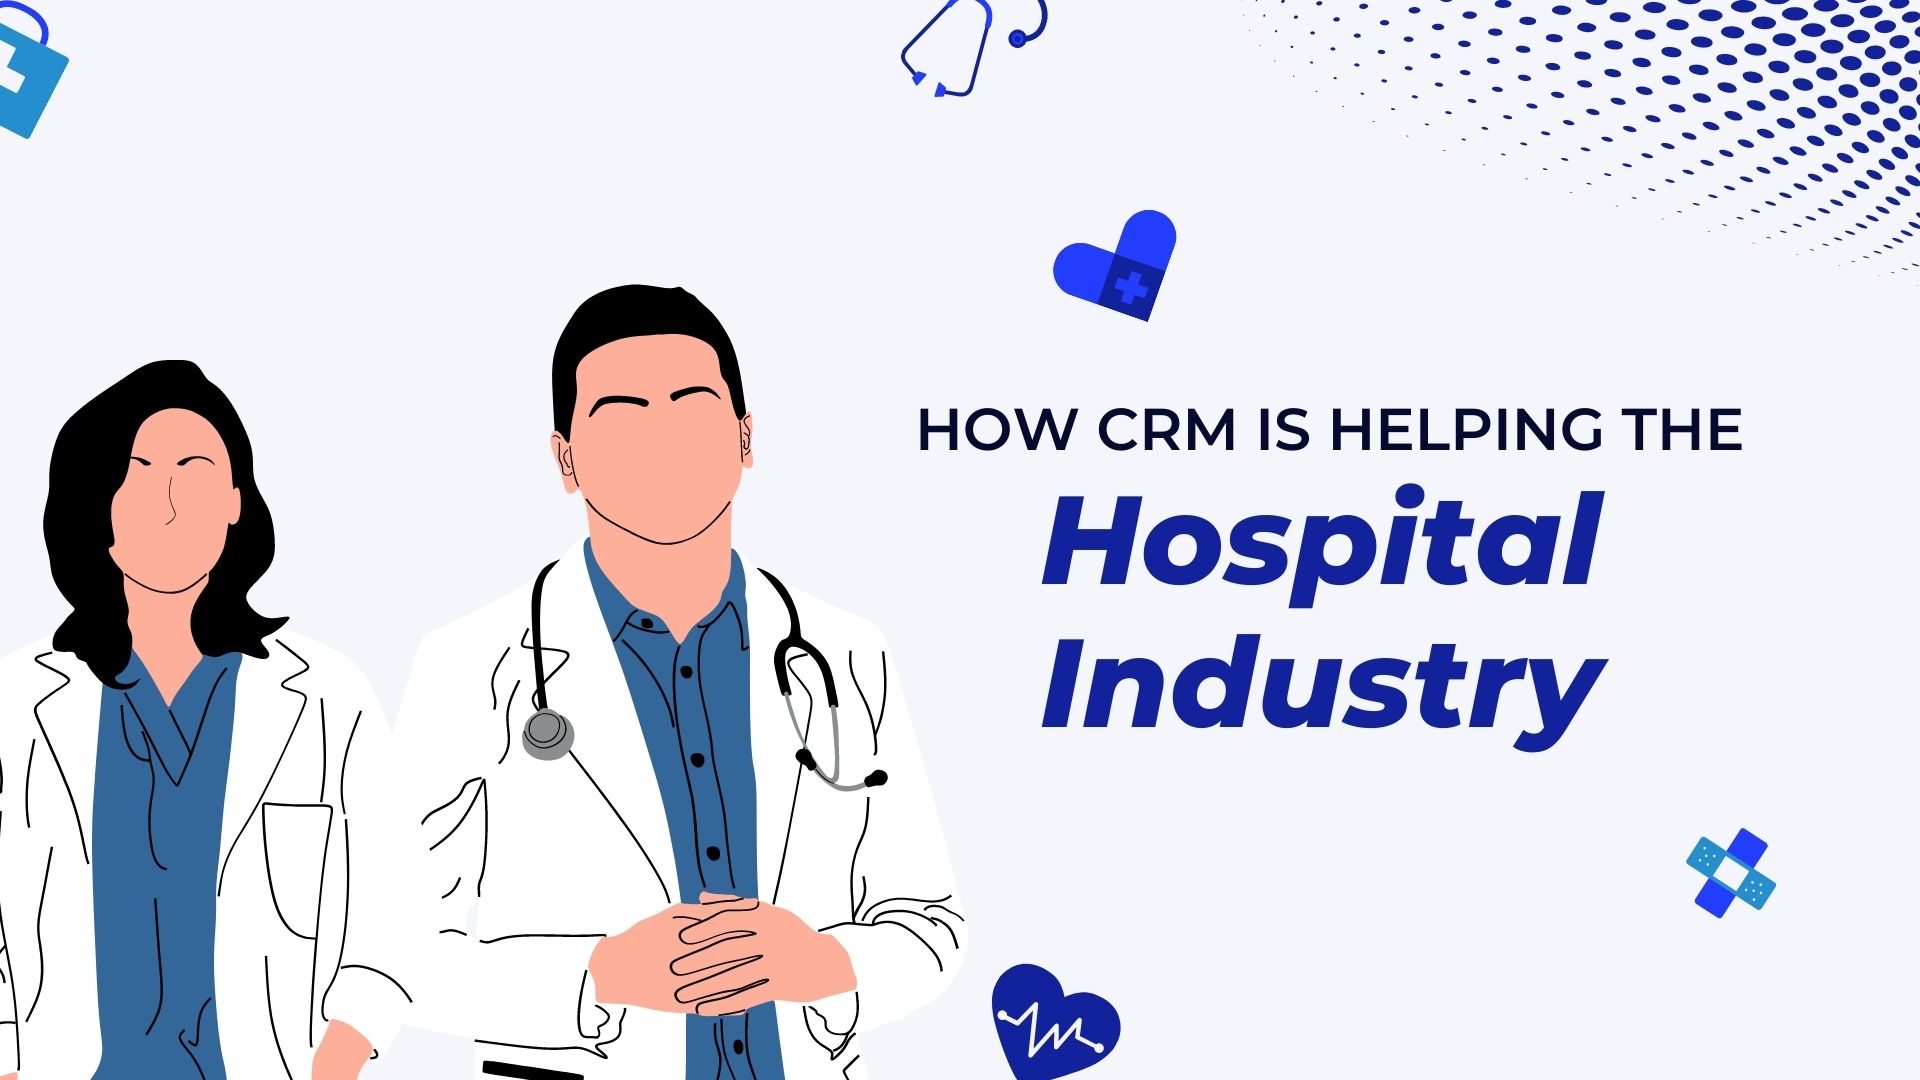 How does CRM help the hospitality industry?